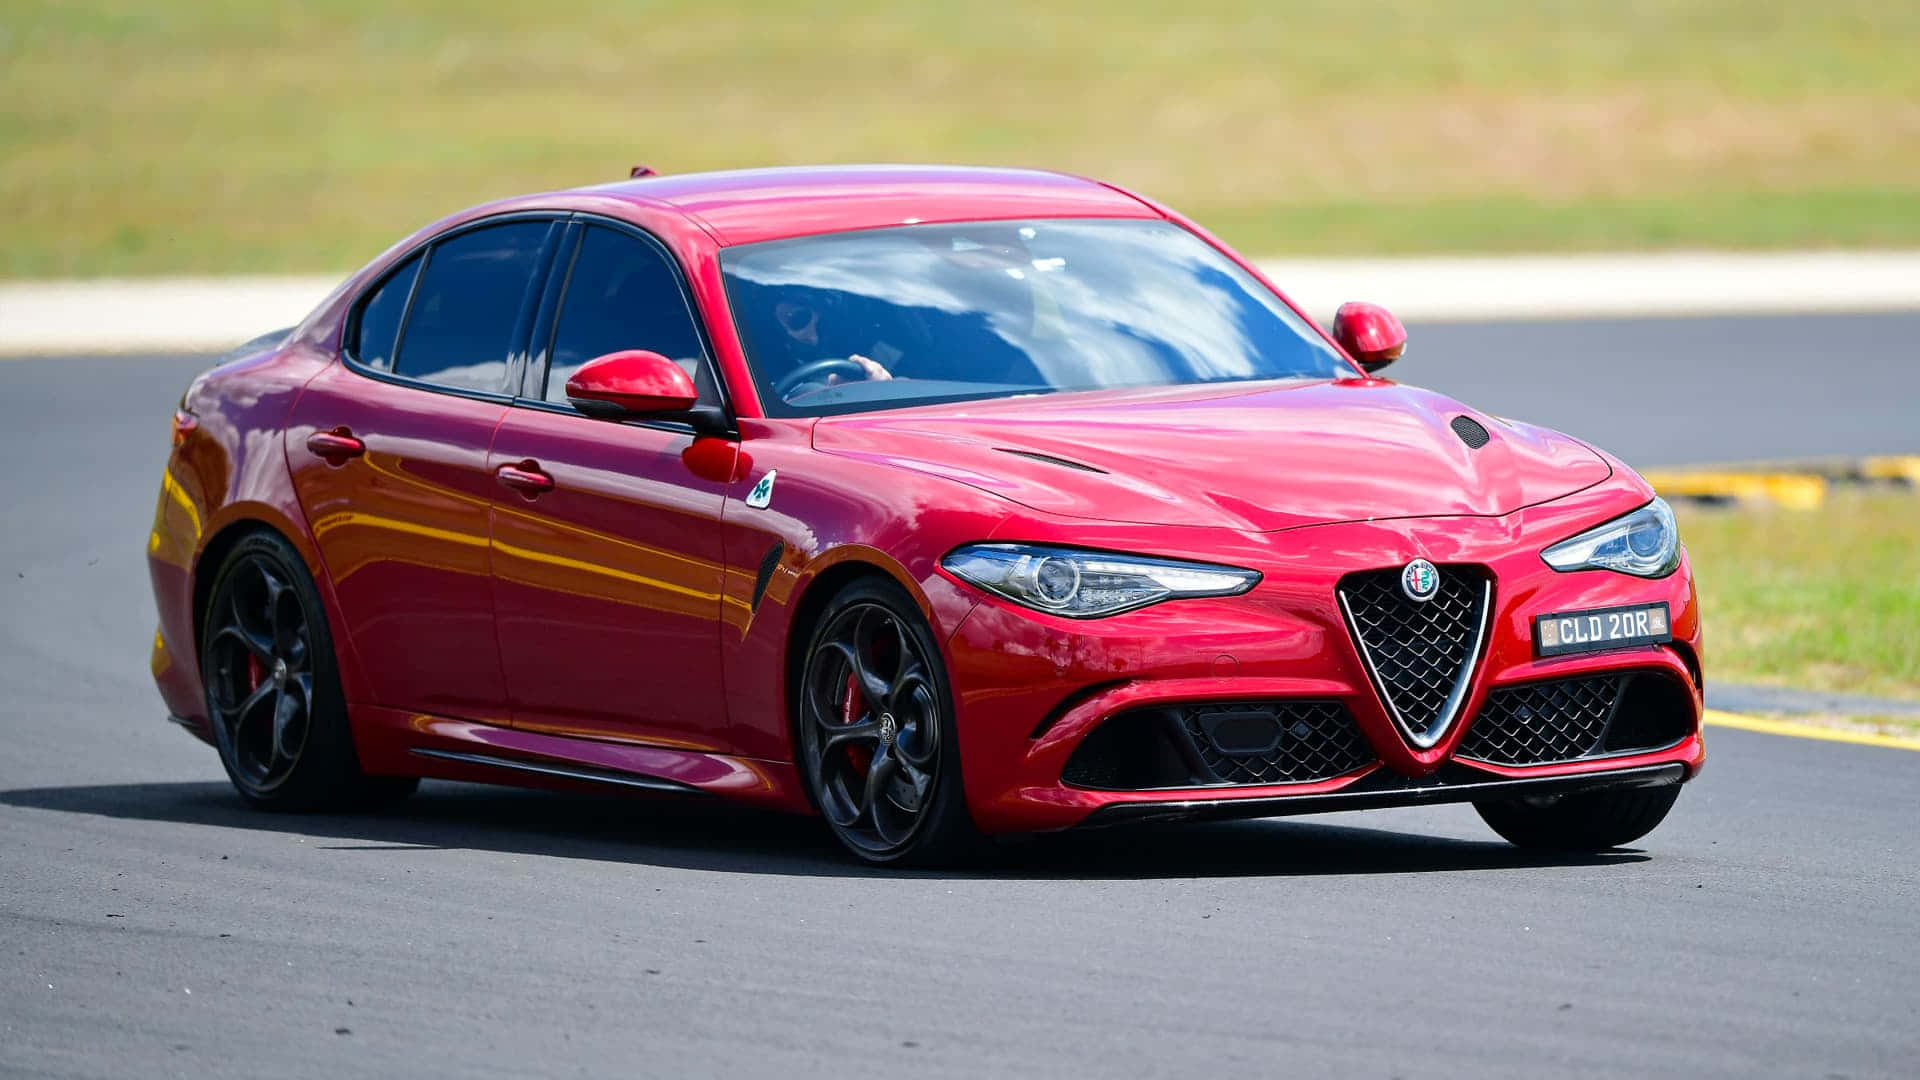 Driving in Style with the Alfa Romeo